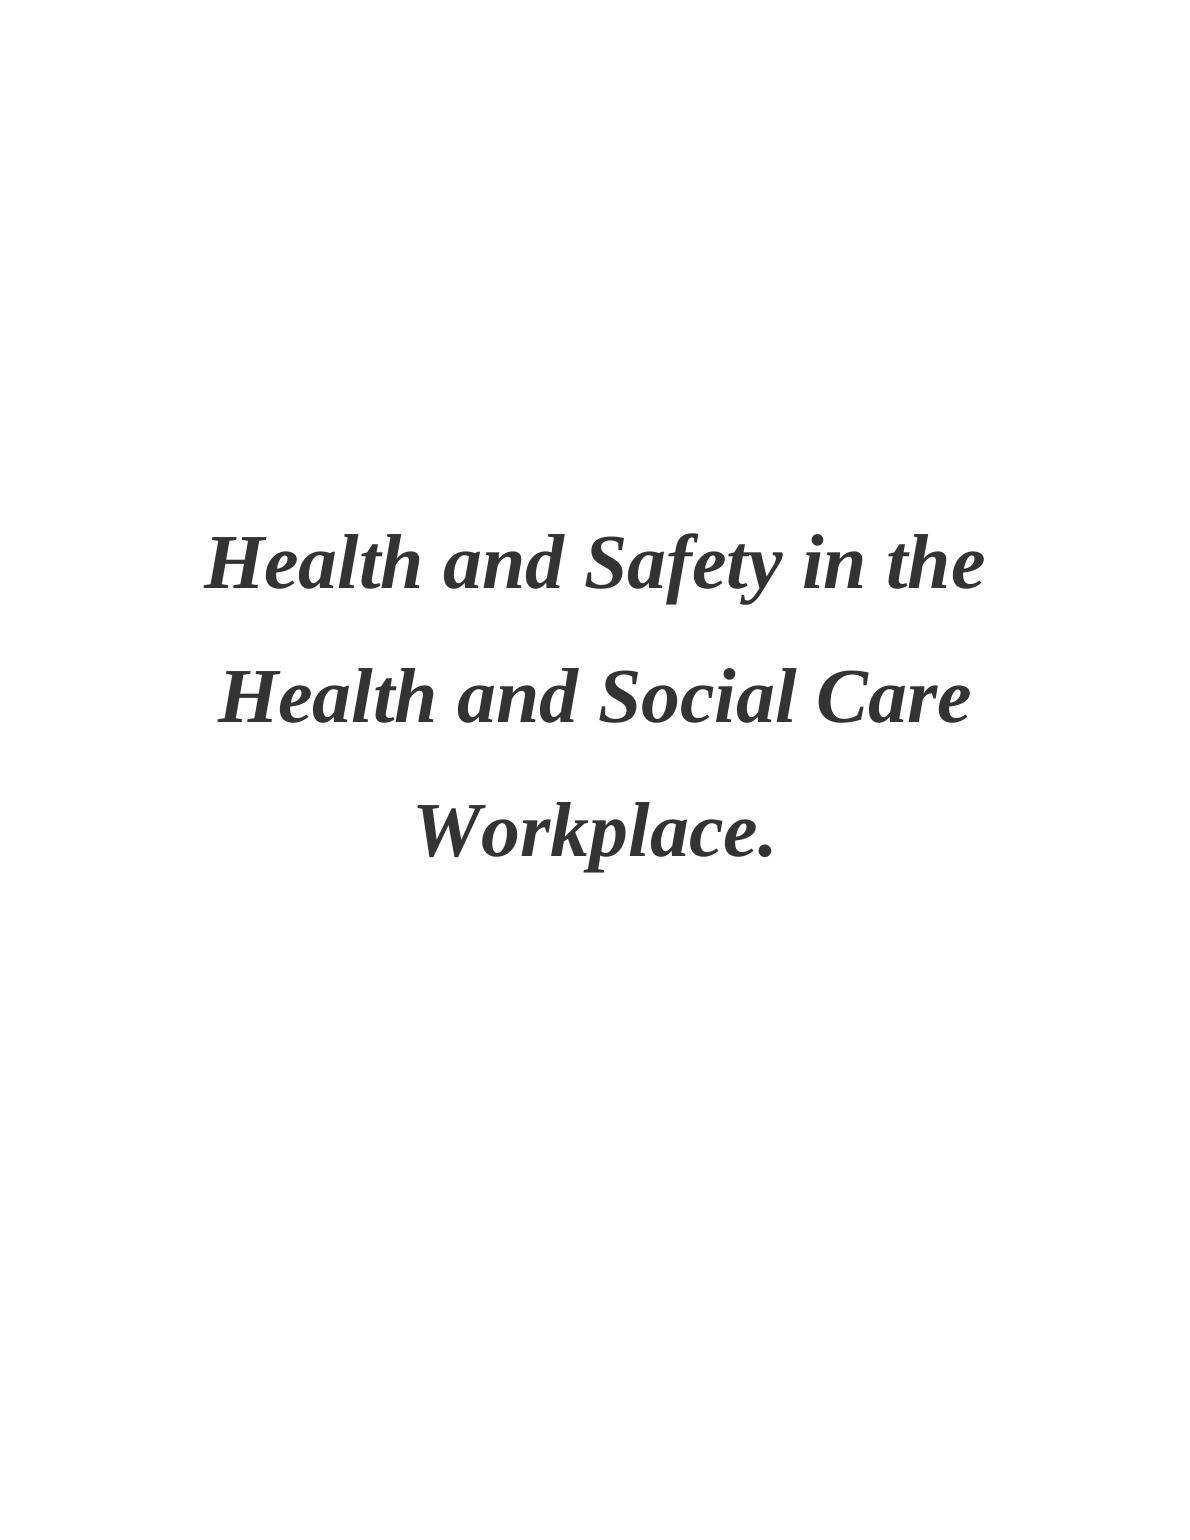 Assignment: Health and Safety in the Health and Social Care Workplace_1